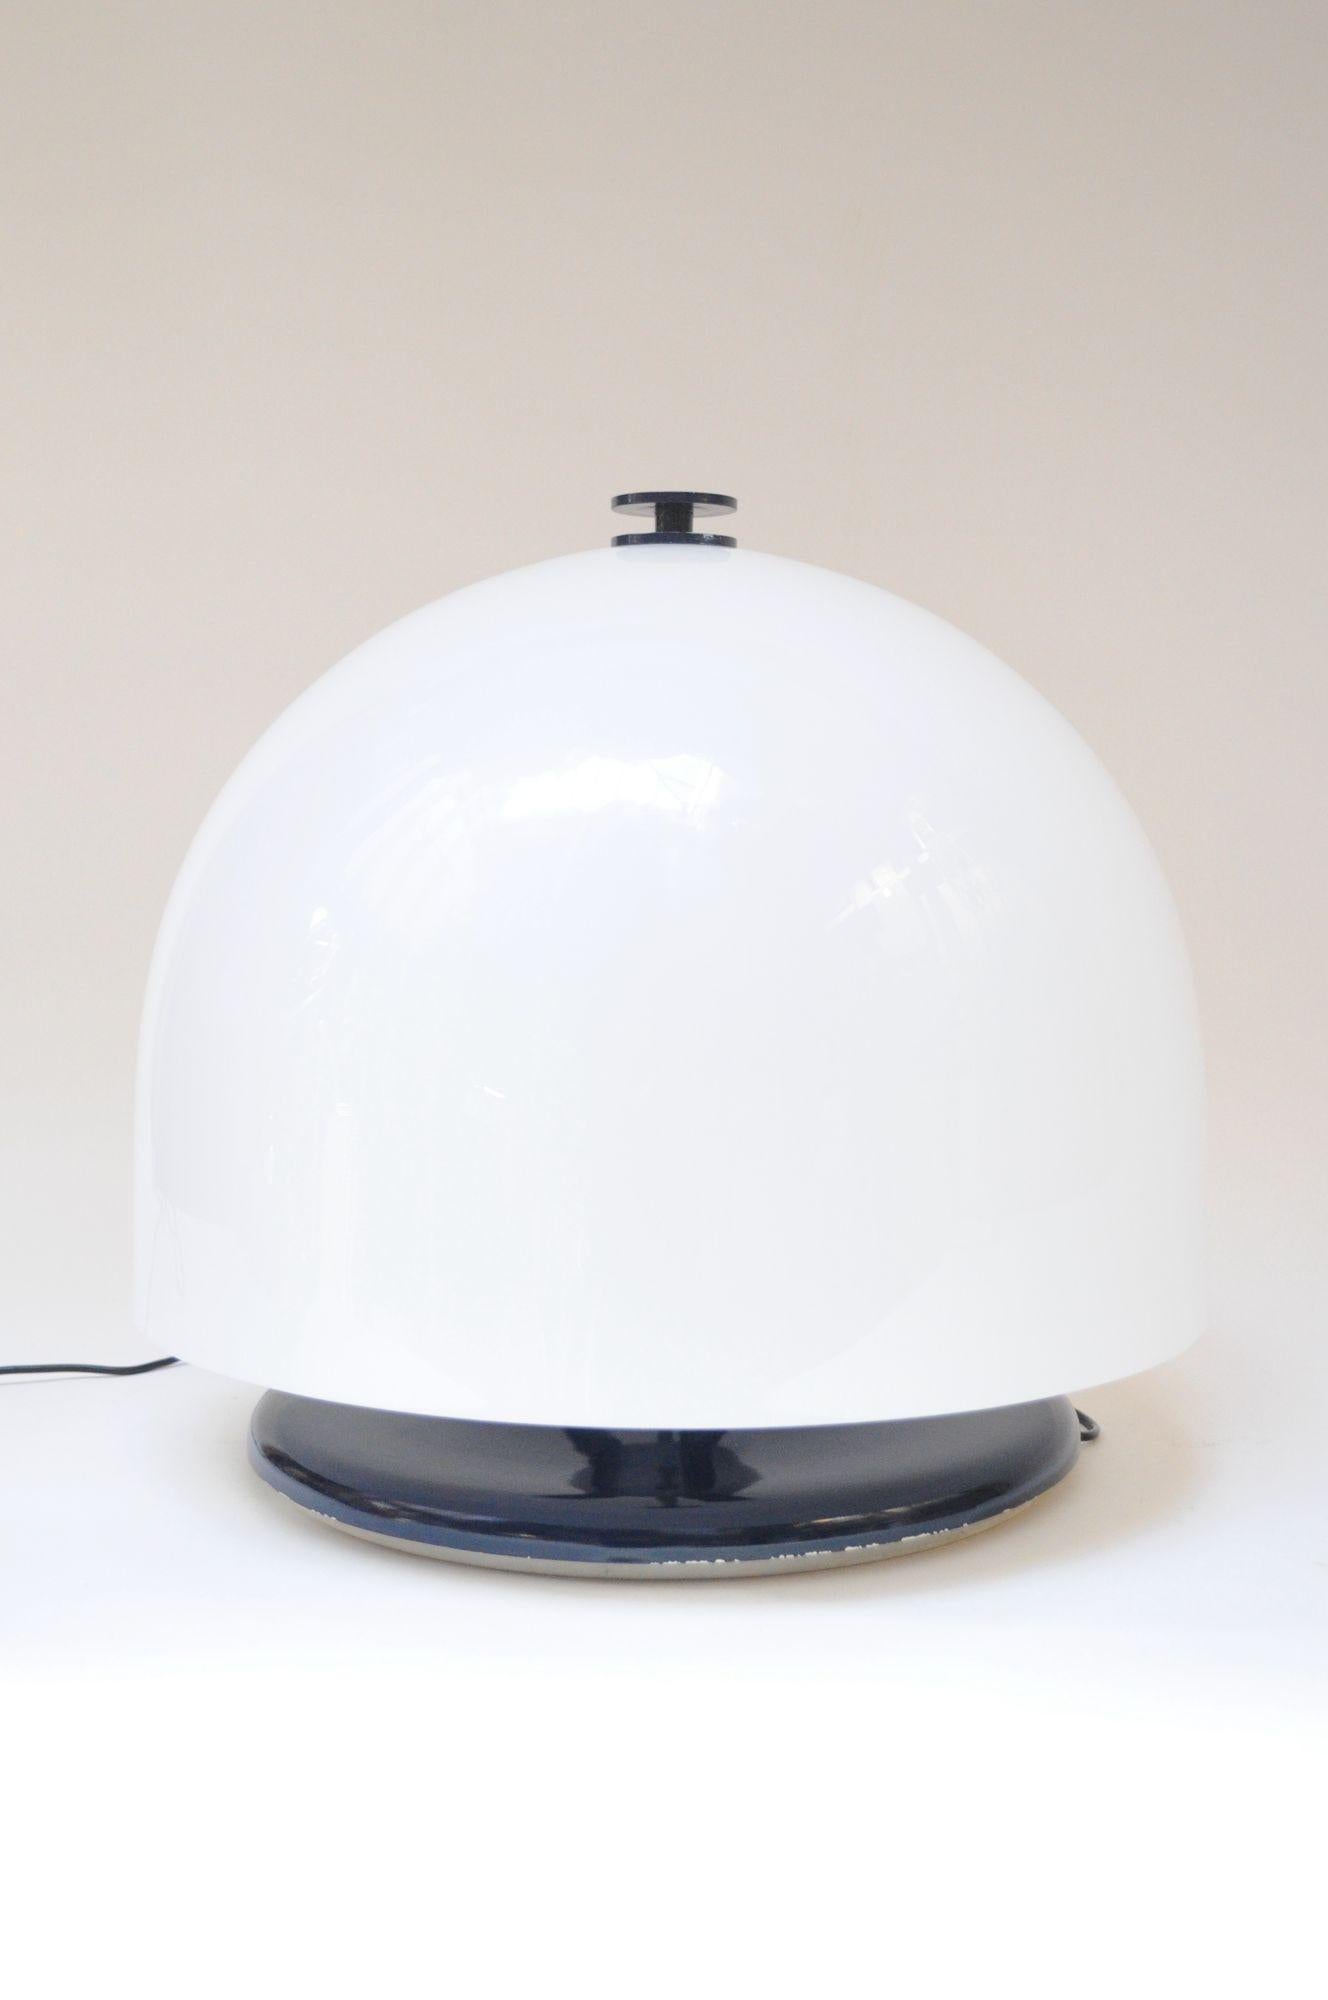 Space age/mushroom-form table lamp composed of an oversized, dome shade in white acrylic supported by a metal stem retaining the original navy enamel to the top finial and circular base (ca. 1970s, Italy). Three socket construction offering a